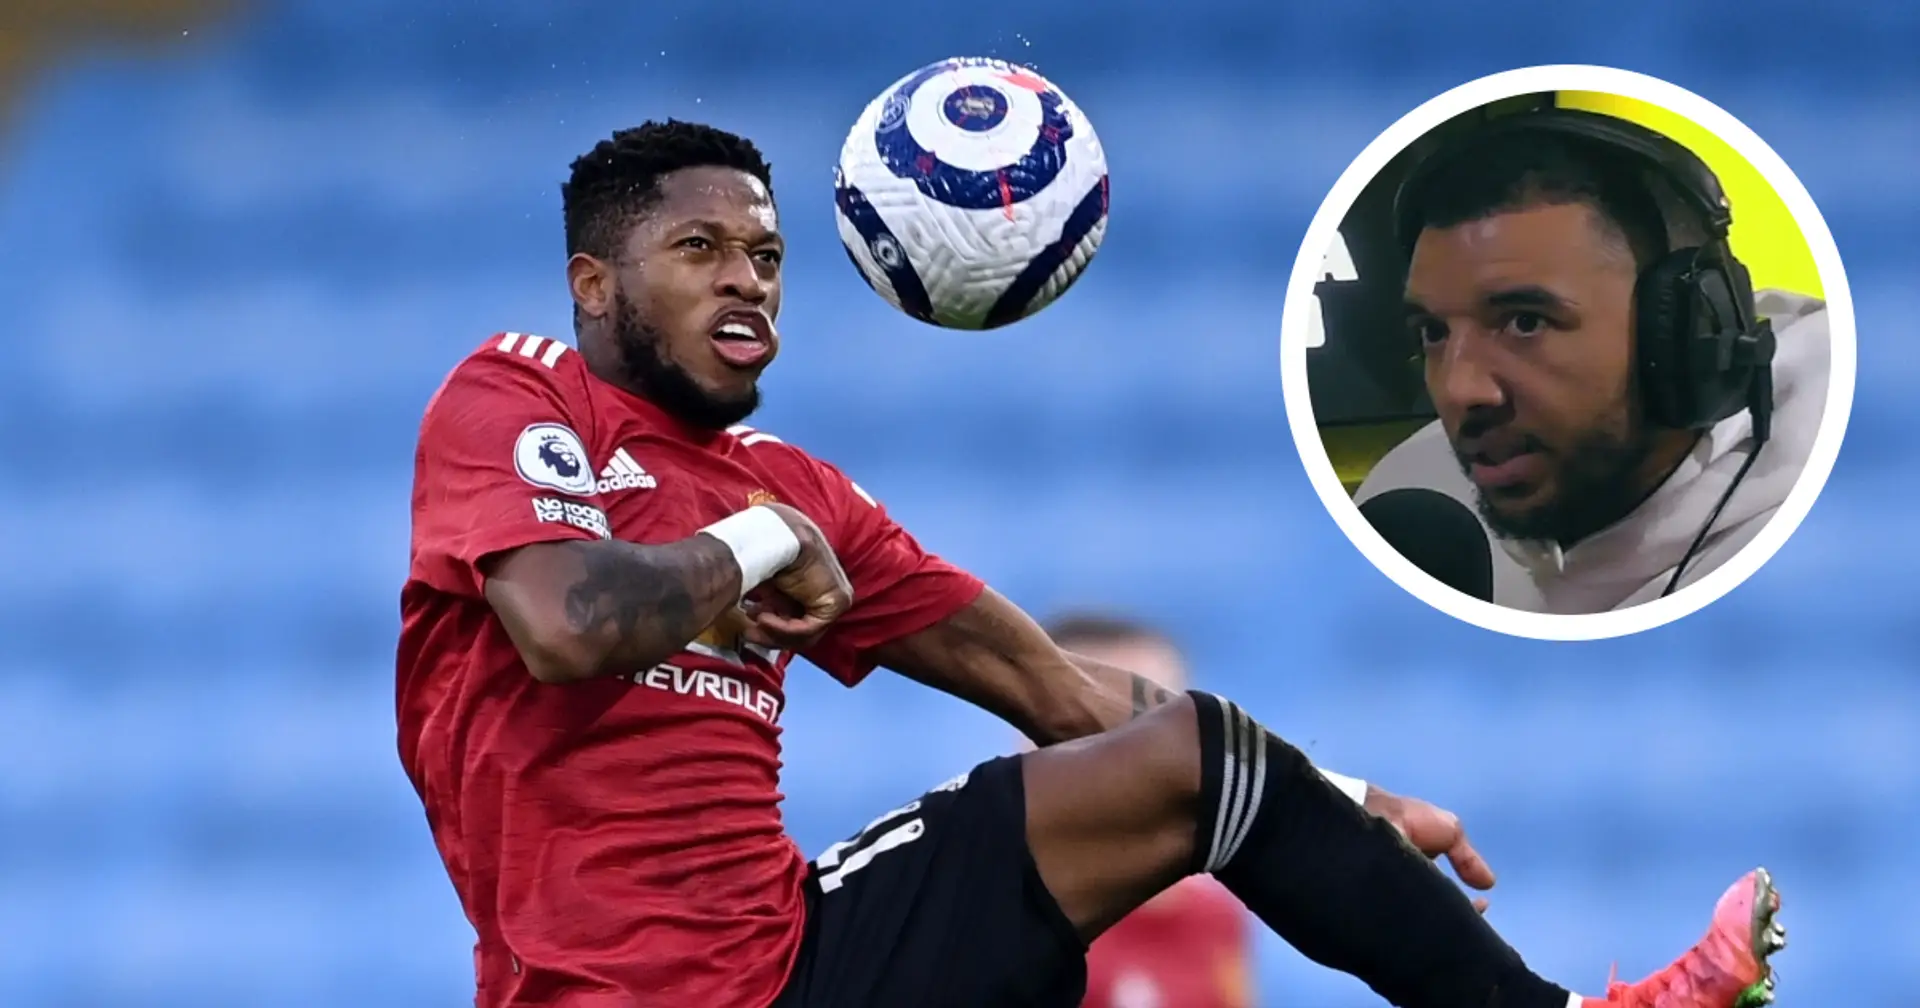 'He's not the best at playing one-touch football': Troy Deeney explains how Leicester targeted Fred